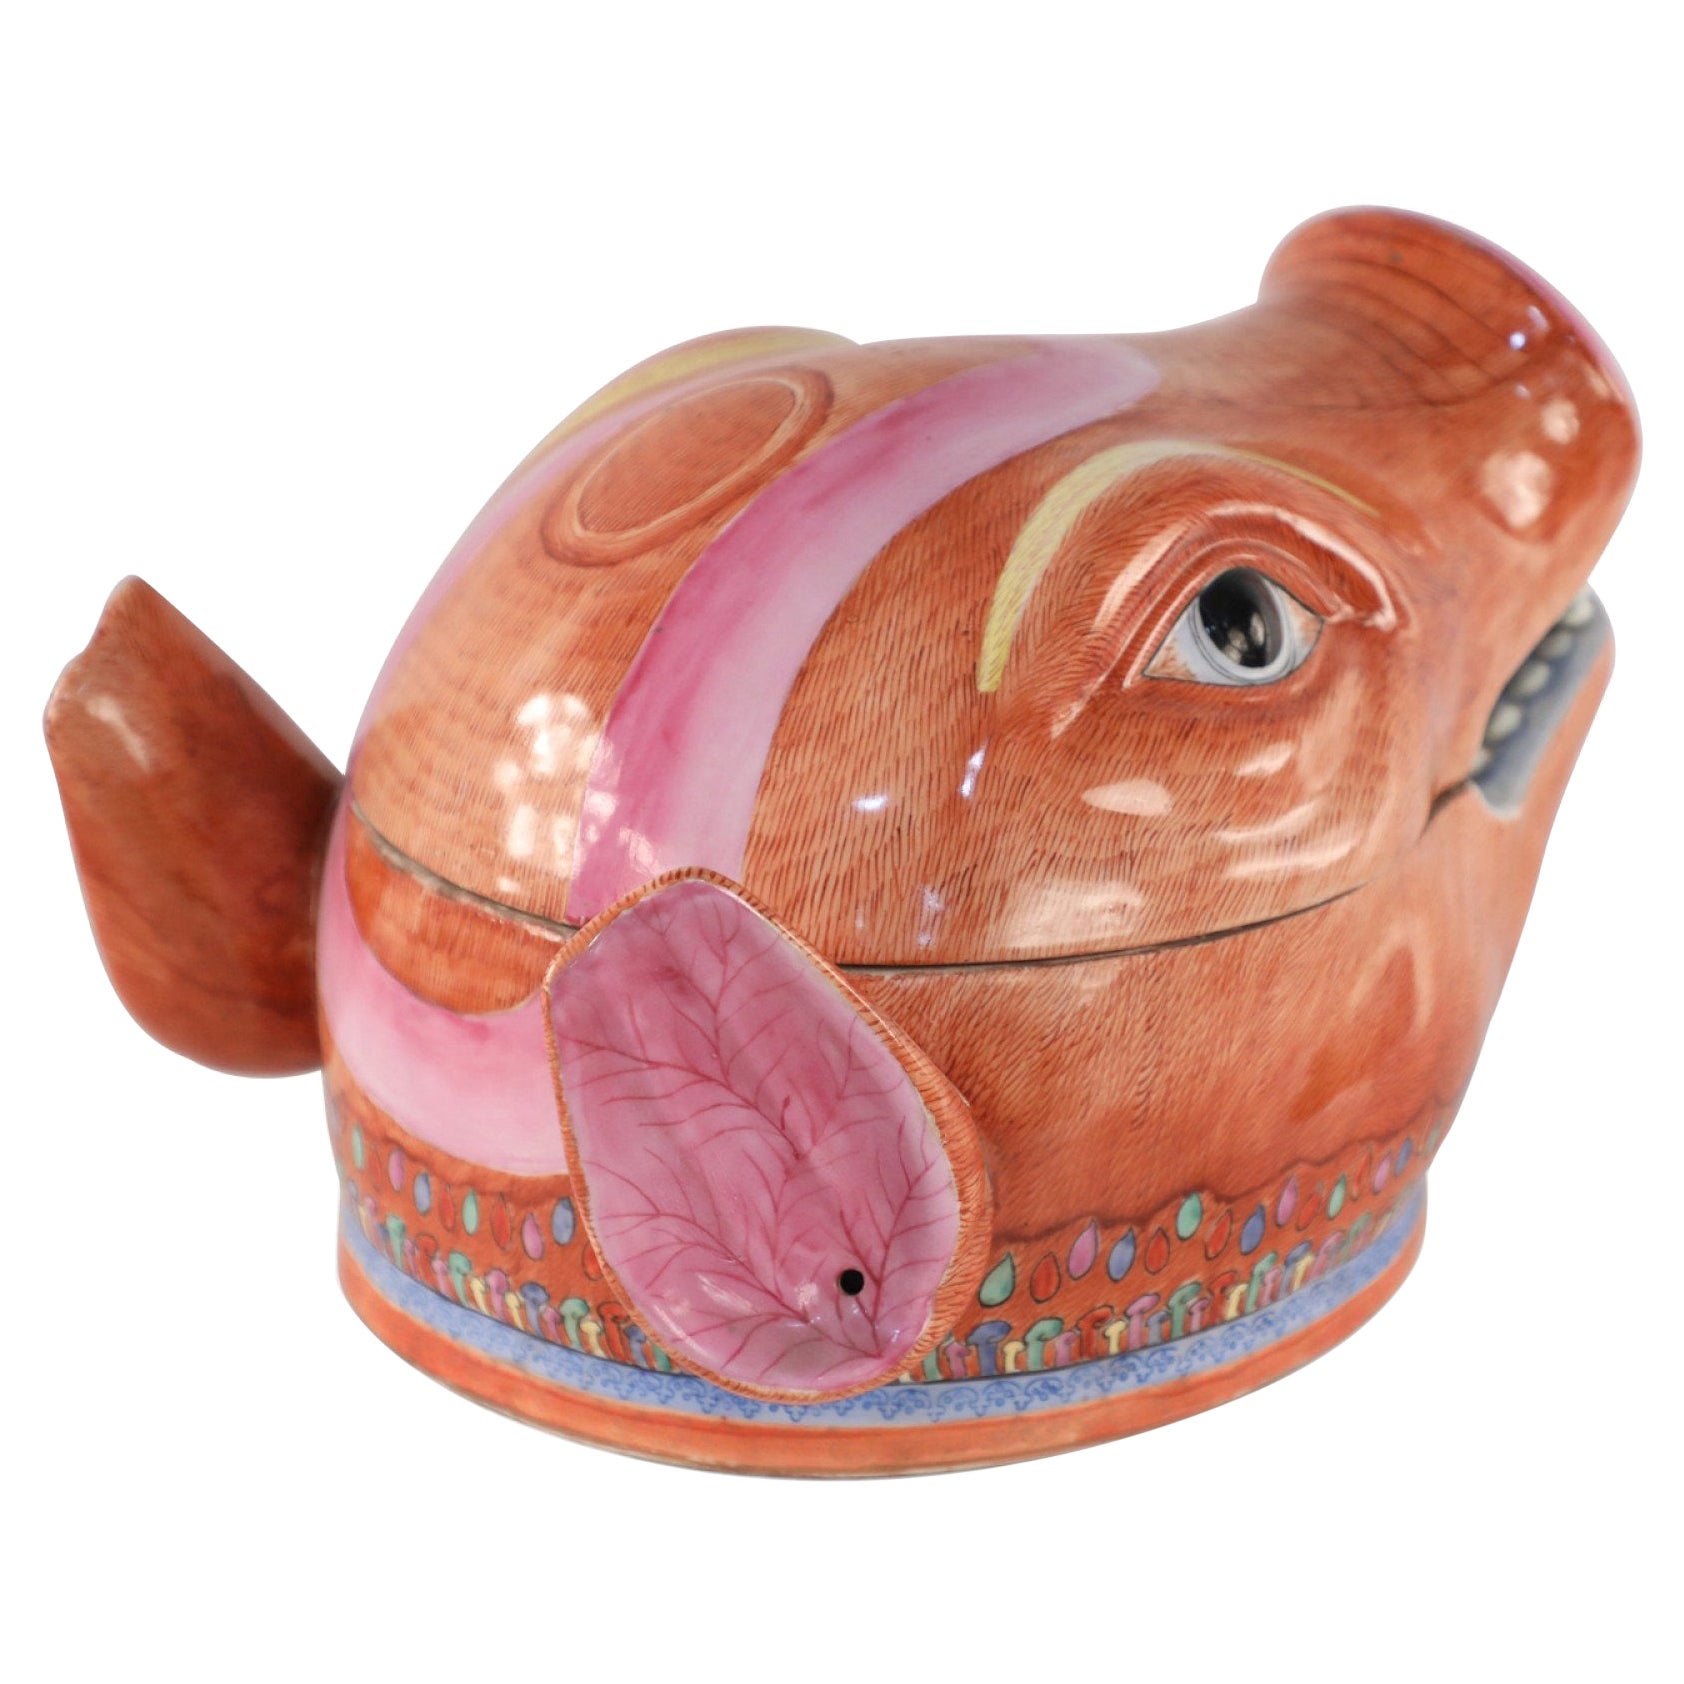 Chinese Pig Head Shaped Porcelain Tureen For Sale